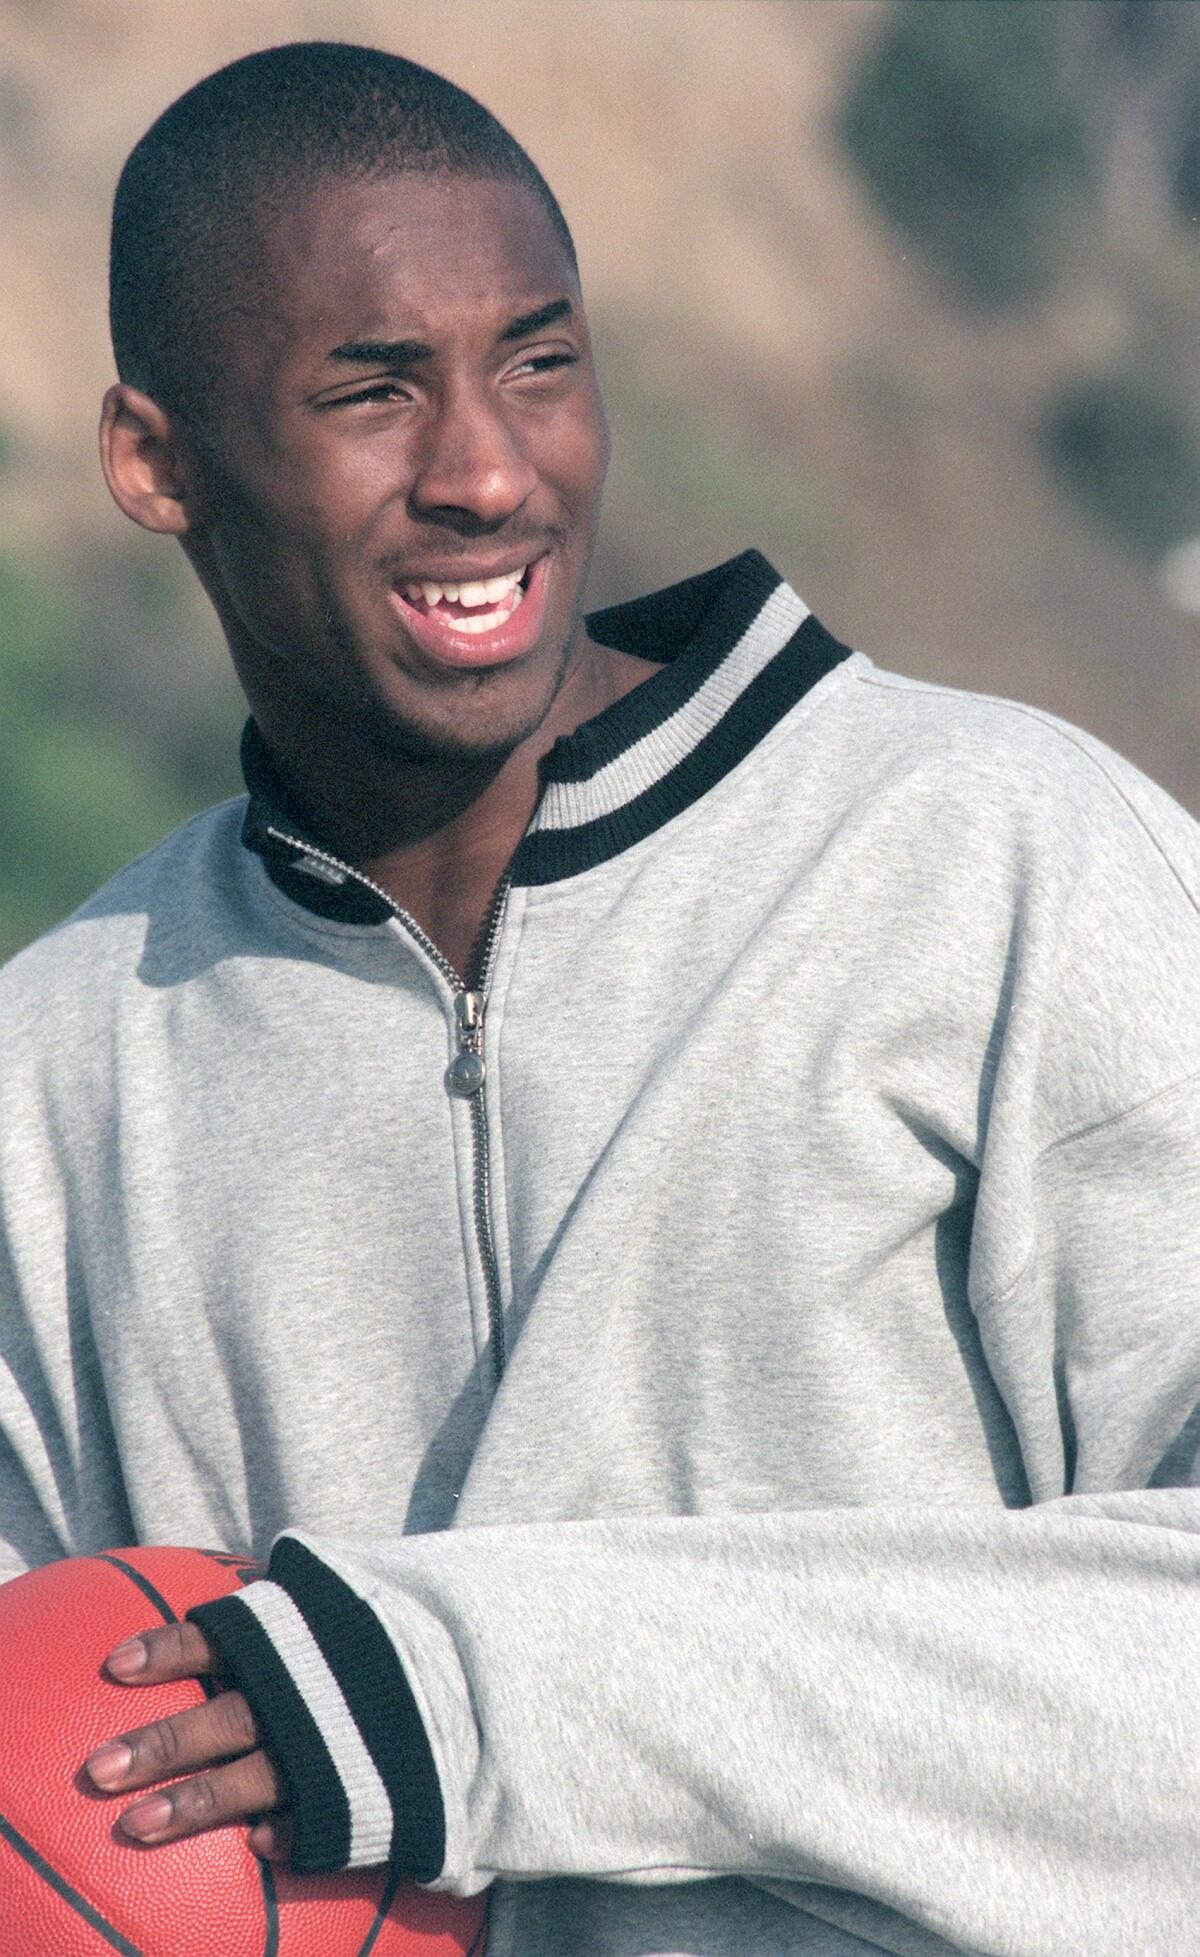 Lakers rookie Kobe Bryant takes part in an ad shoot for Adidas at Will Rogers State Beach.